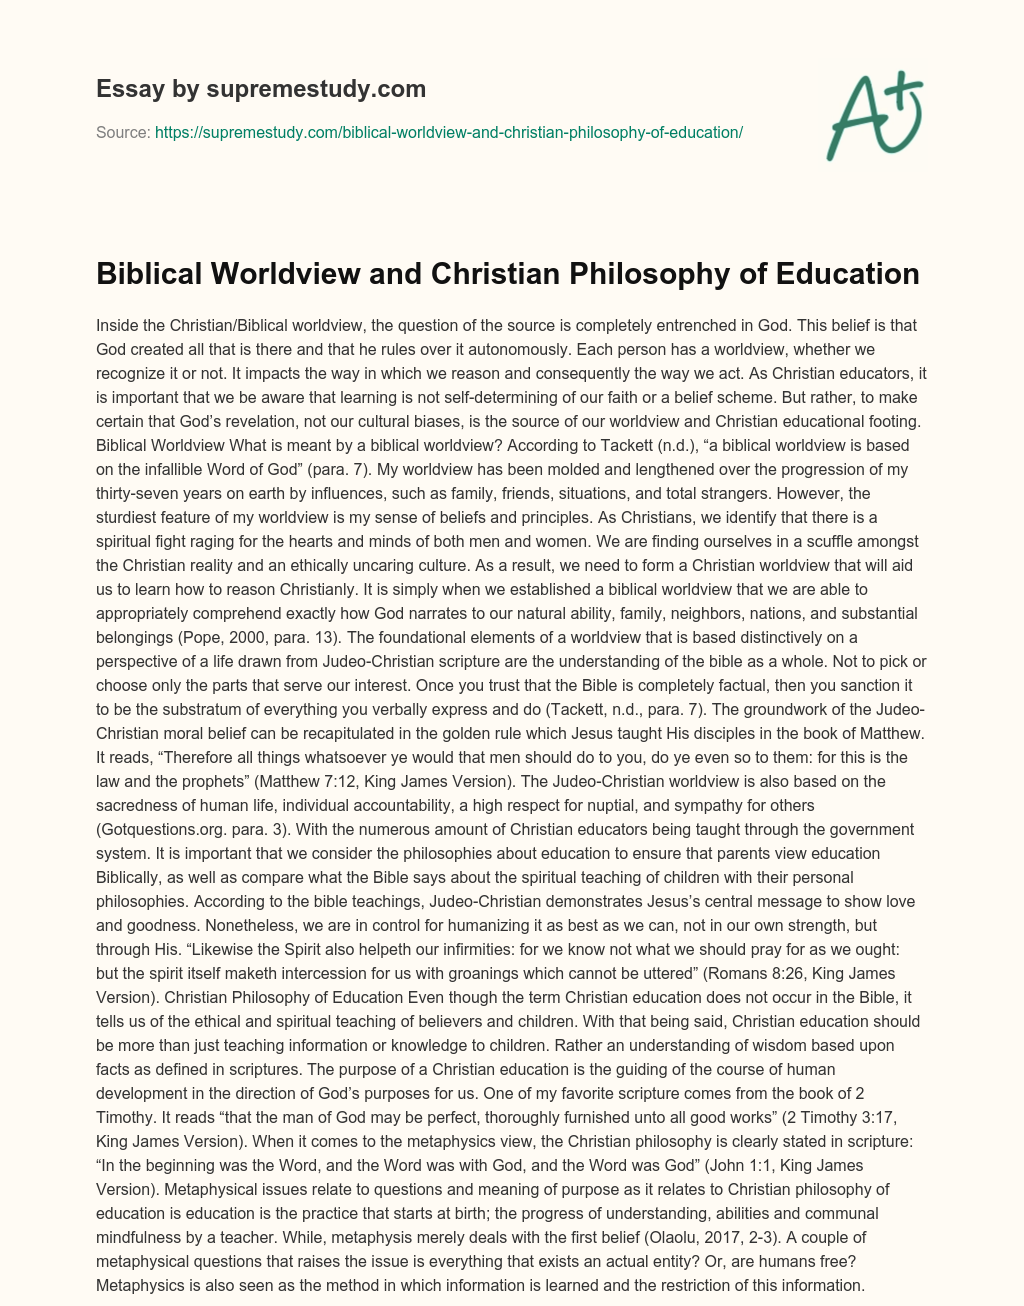 christian worldview in education essay